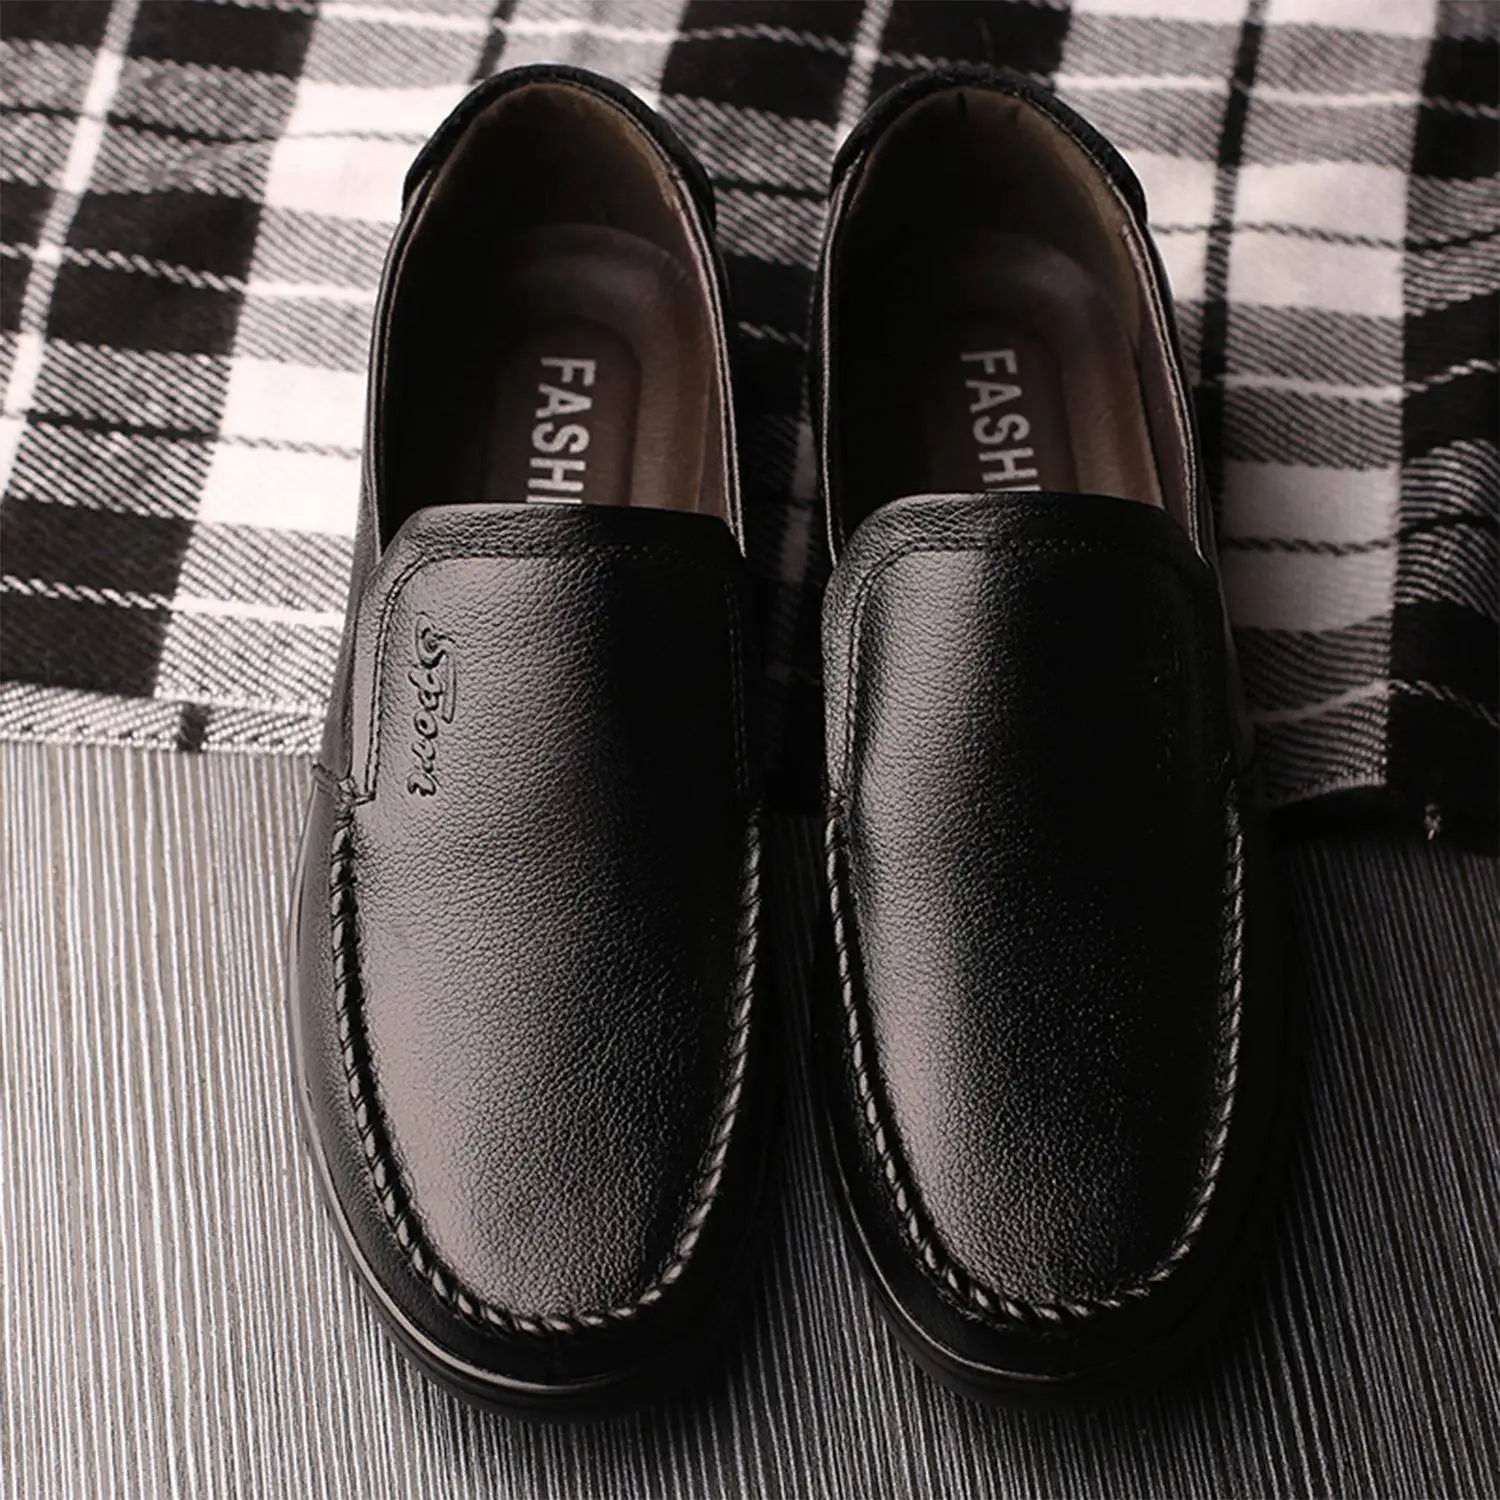 Aliexpress.com : Buy ABDB Men Soft Leather Loafers 2018 Spring Summer ...